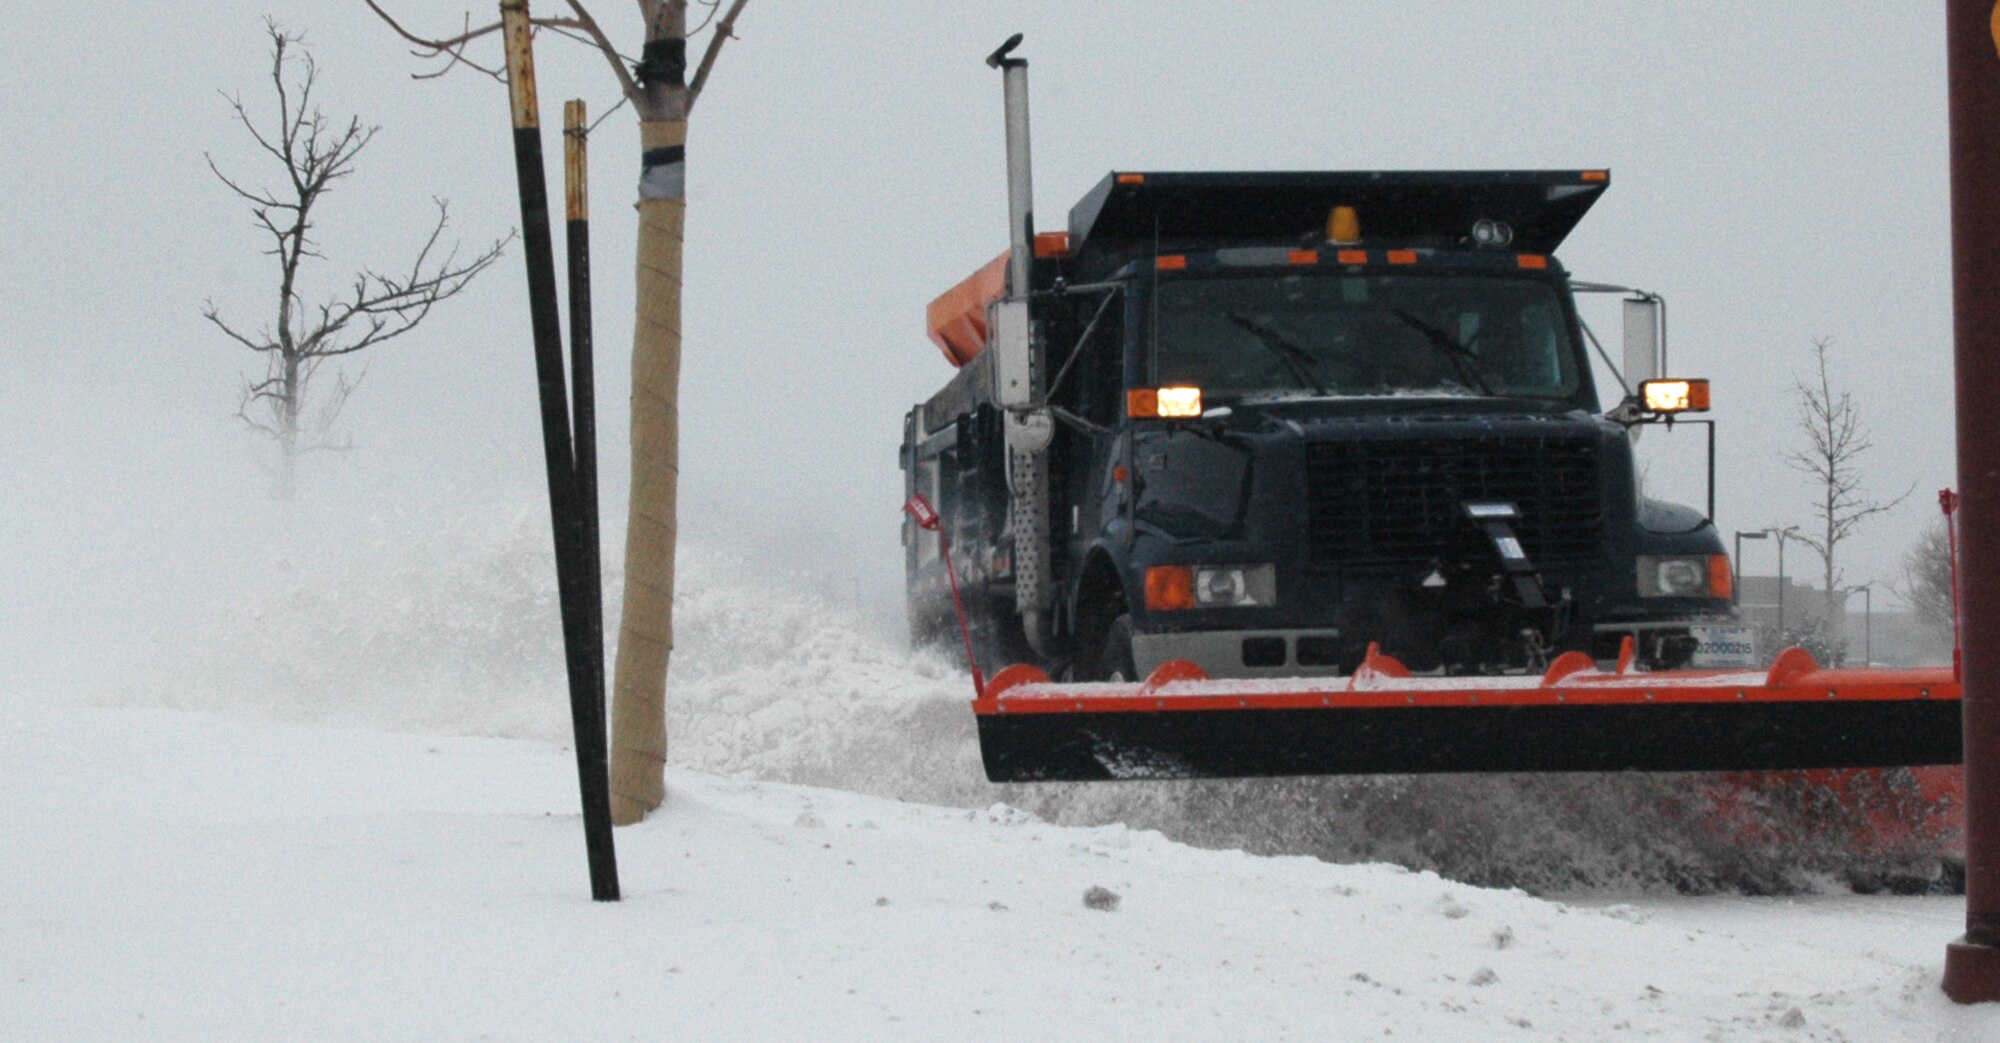 The 460th Civil Engineer Squadron mobilized 10 snowplows to clear 35 miles of roads on Buckley Air Force Base during a snowstorm Dec. 27. (U.S. Air Force photo by Capt. Adrianne Michele)